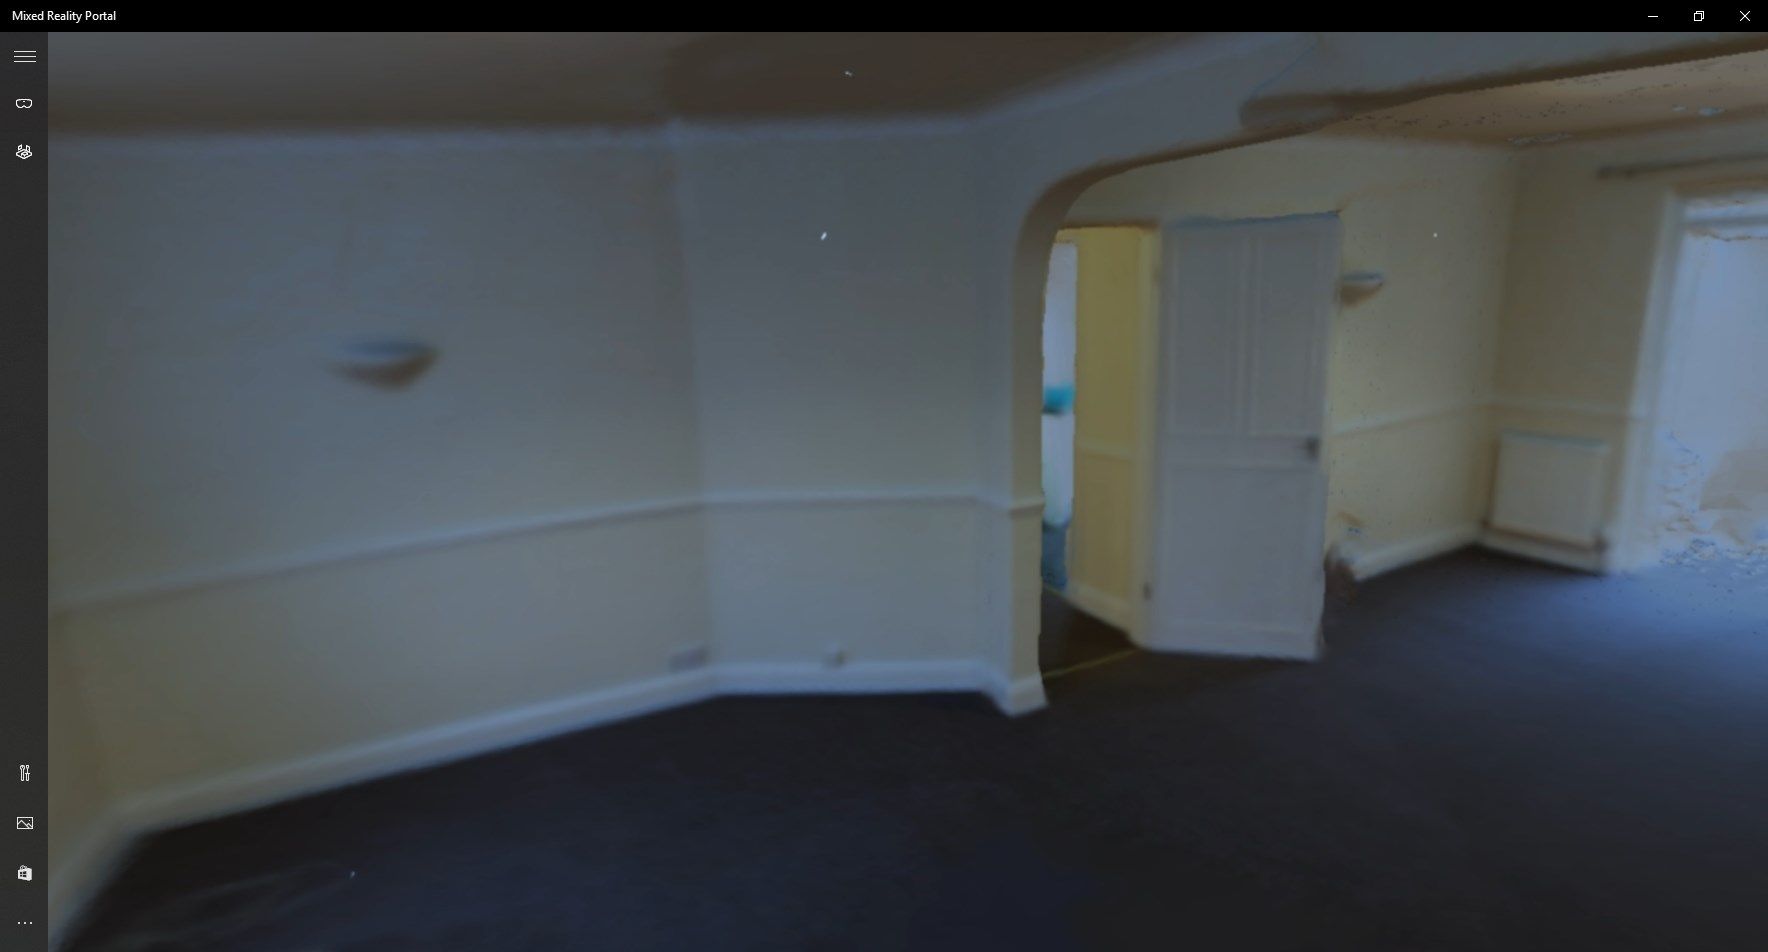 In App footage of a High Resolution Room Scan. 144.3MB